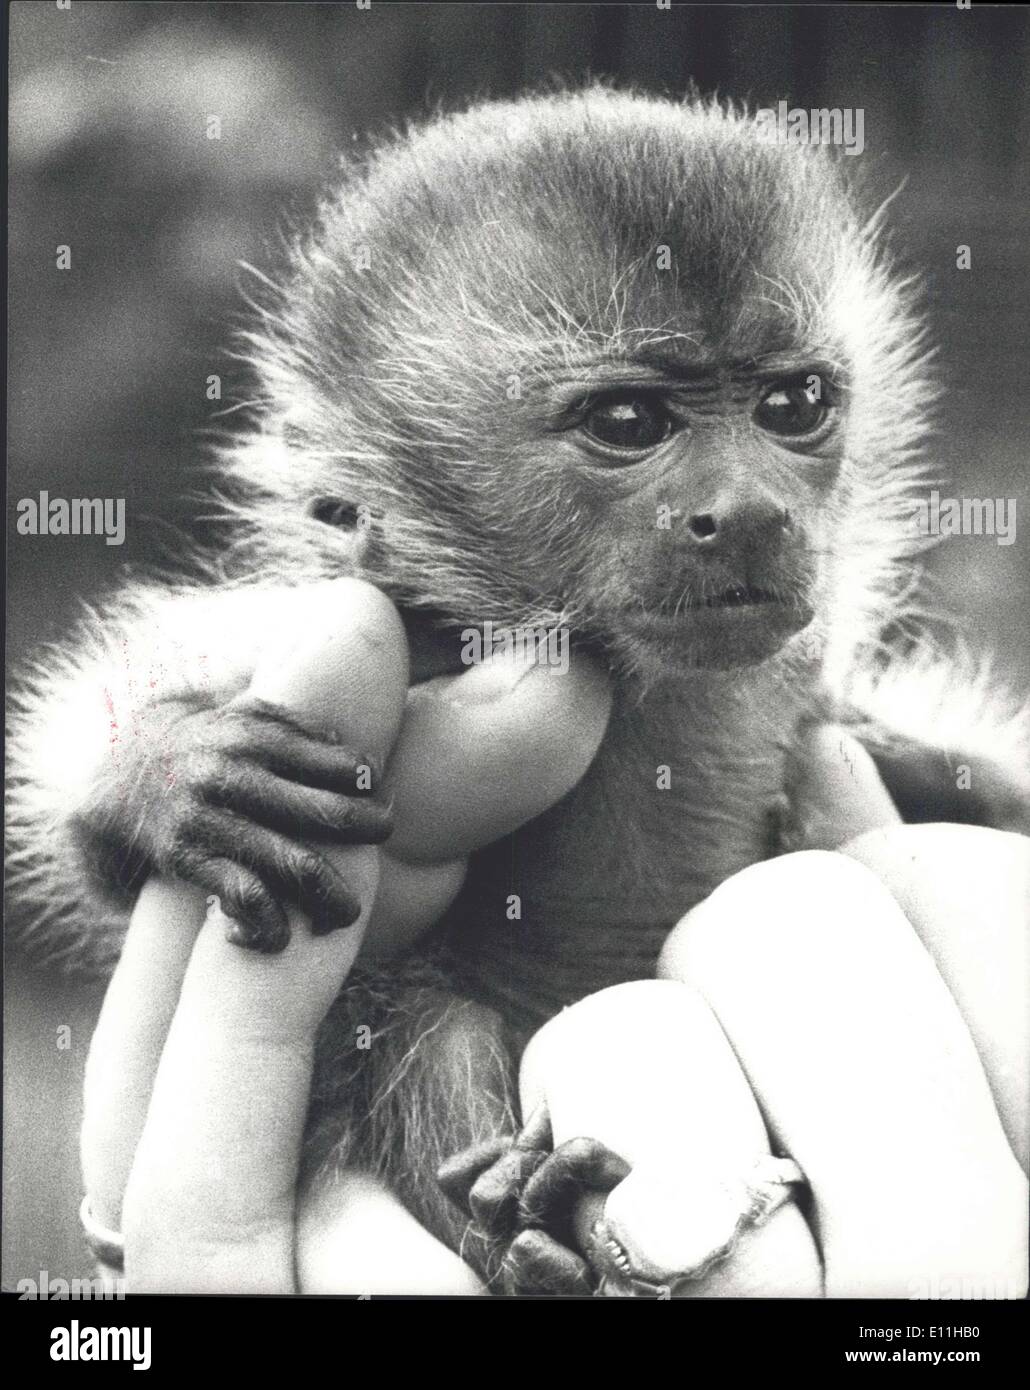 Jun. 08, 1978 - Baby Capuchins at the London Zoo. Jim and Tim, two Brown Capuchins, were born at London Zoo on the 30th April. Their parents are Minnie and Chi Chi. When it was realised that Minnie could only cope with one of her off springs, Jim was taken from her and is being hand reared by senior keeper Ron Smith. Capuchins come from South America and it is fairly rare for them to be hand reared. Photo Shows: Jim the hand reared Capuchin seen Stock Photo